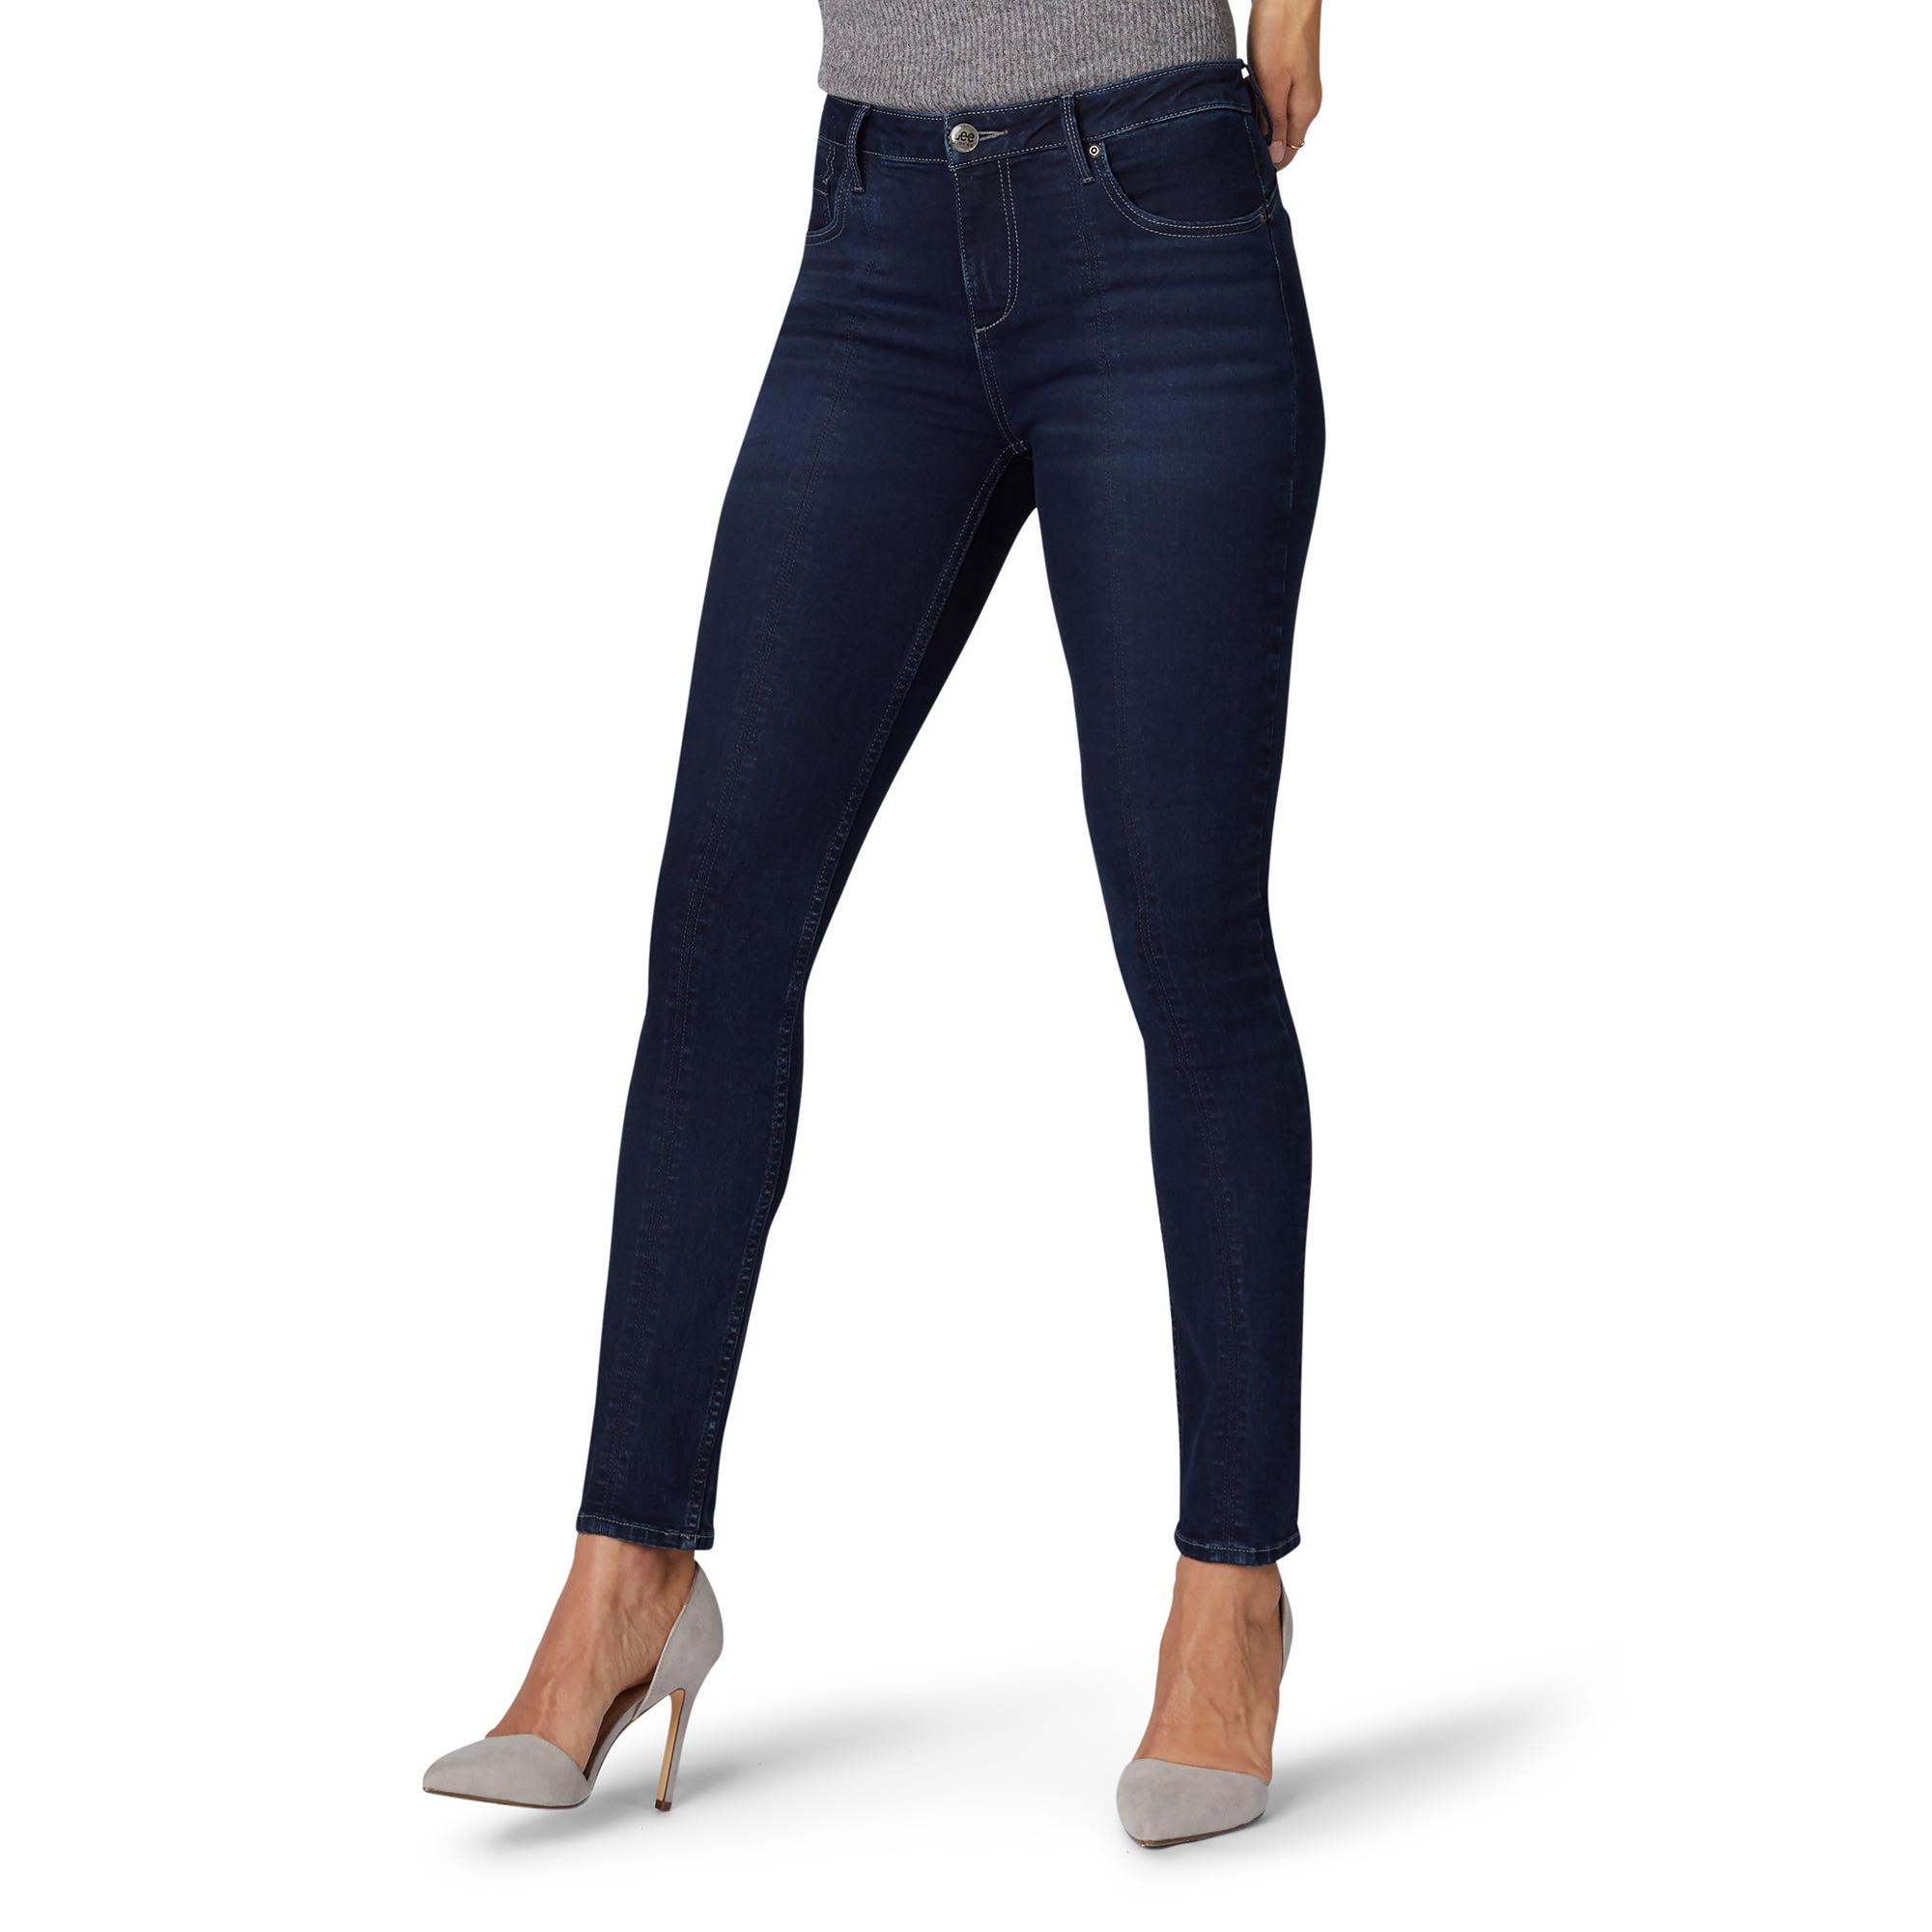 Women's Shape Illusions Seamed Front Skinny Jean